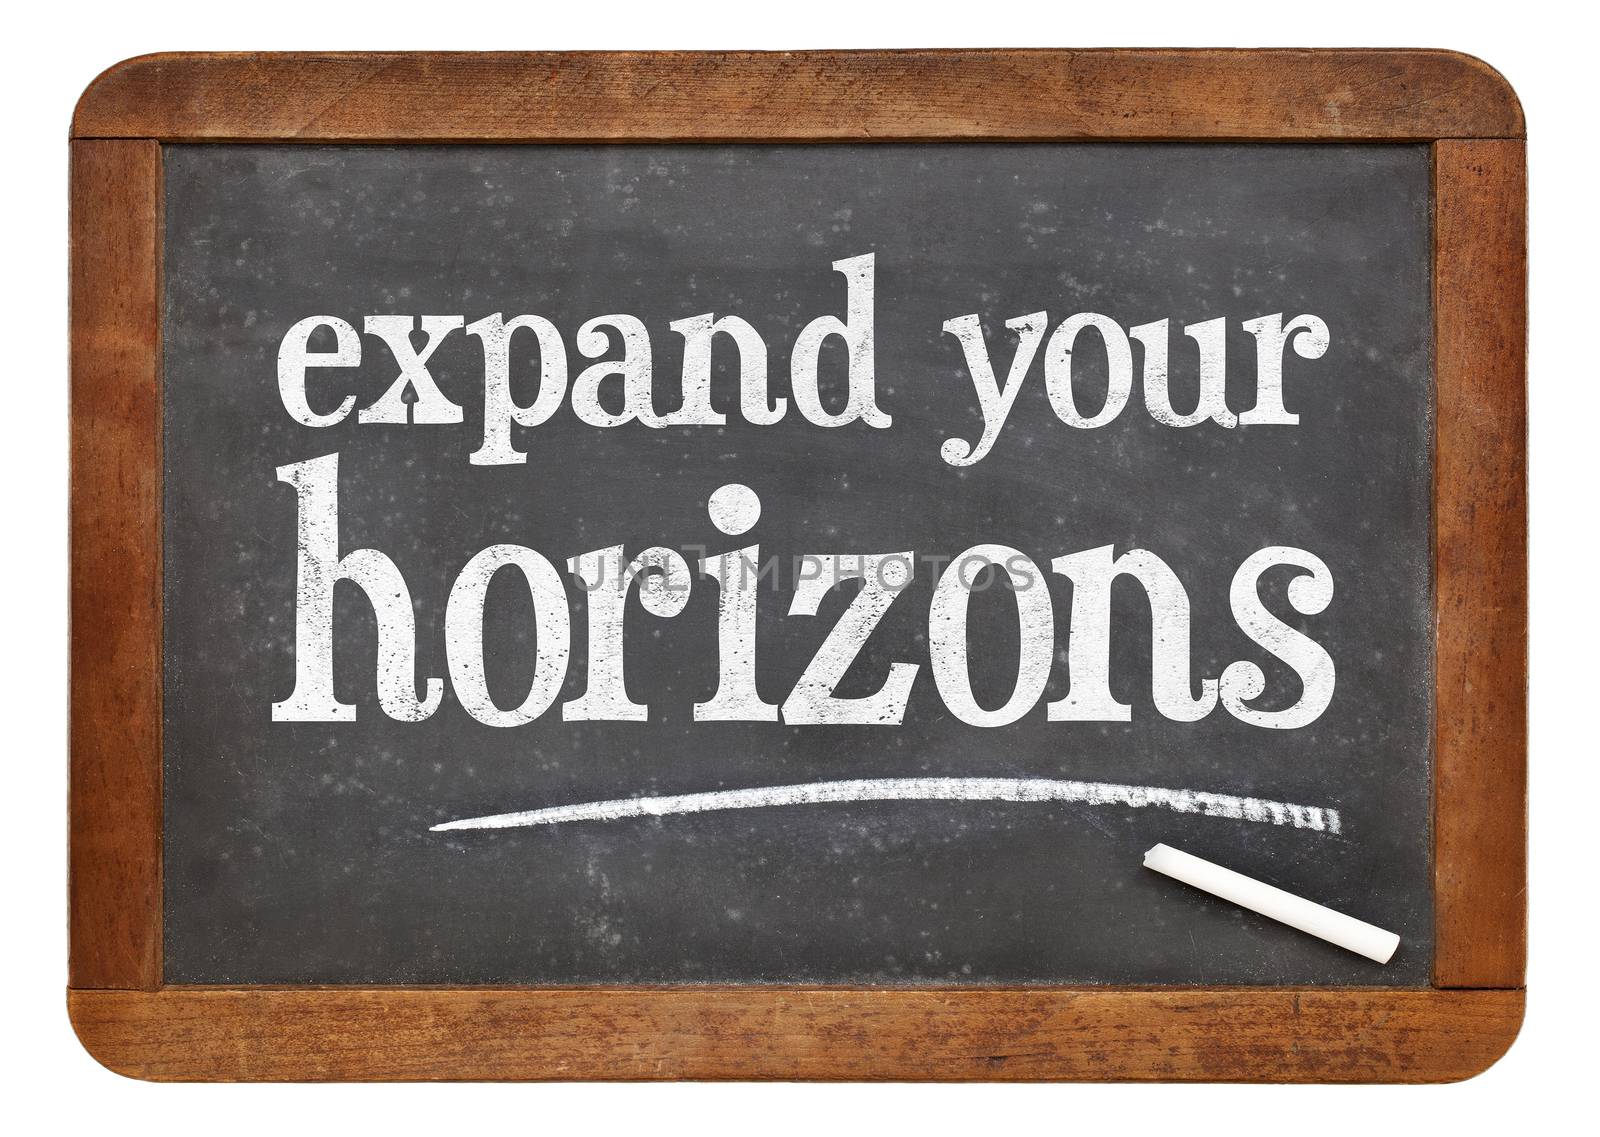 Expand your horizons blackboard sign by PixelsAway